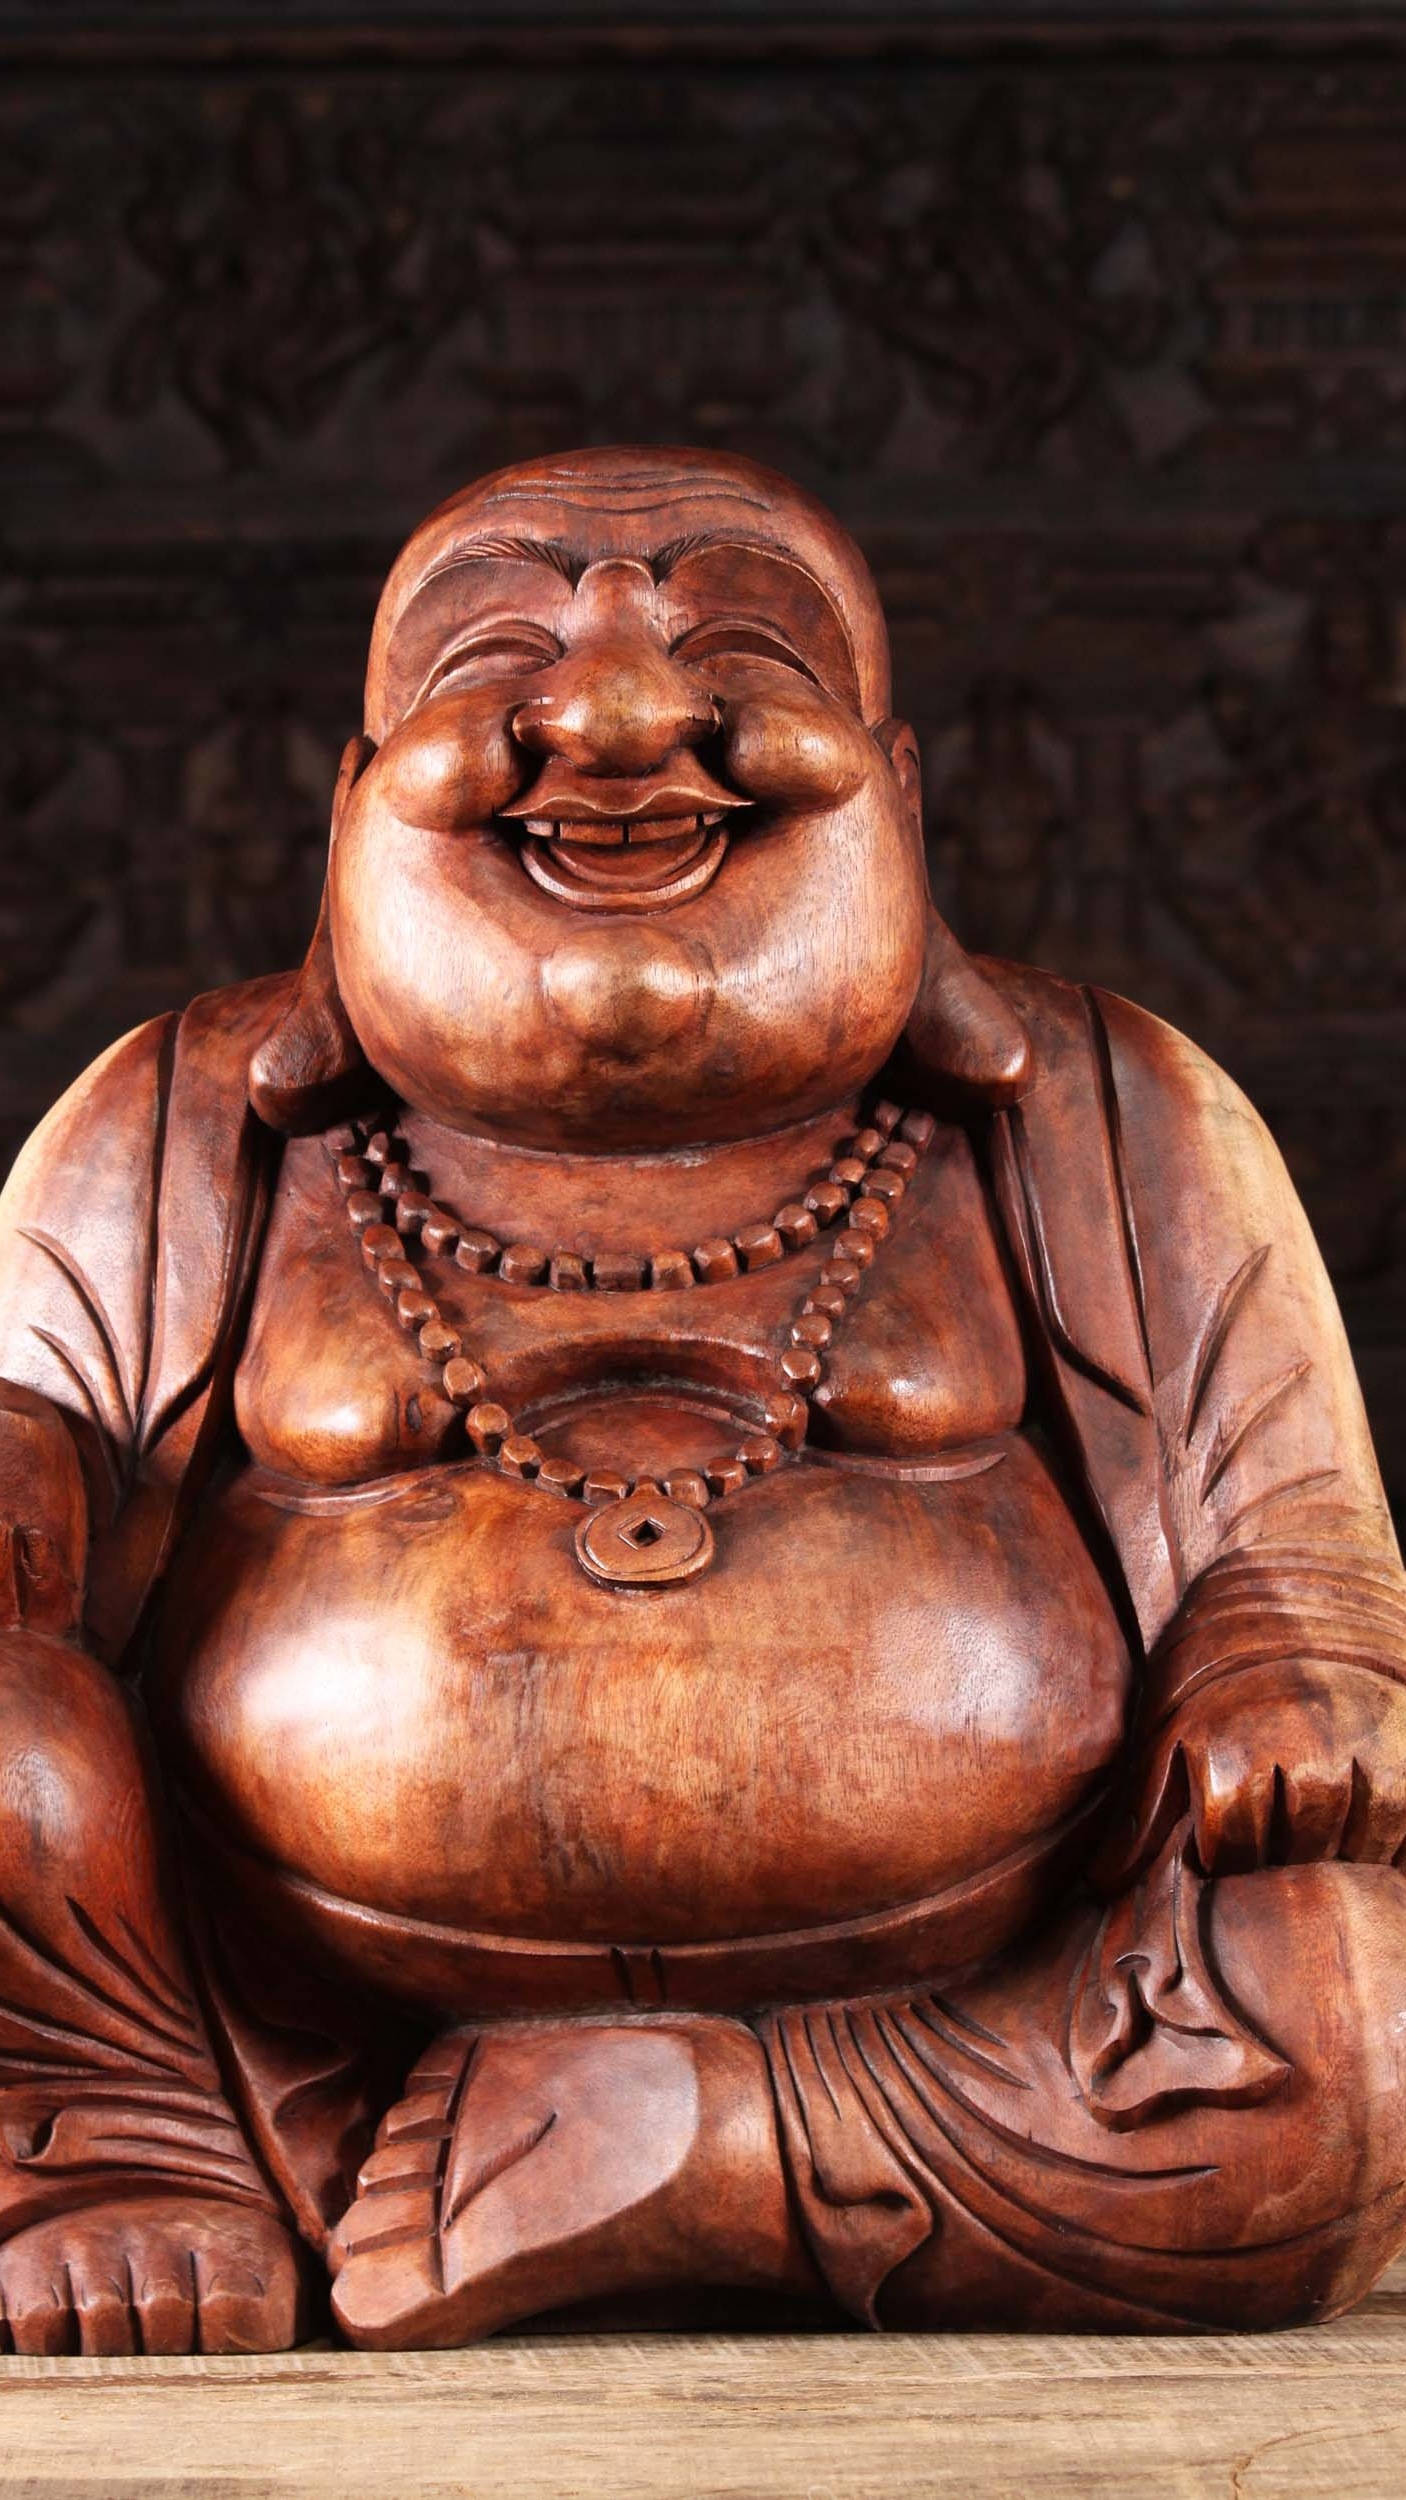 Caption: "Enigmatic Wooden Laughing Buddha Statue" Wallpaper